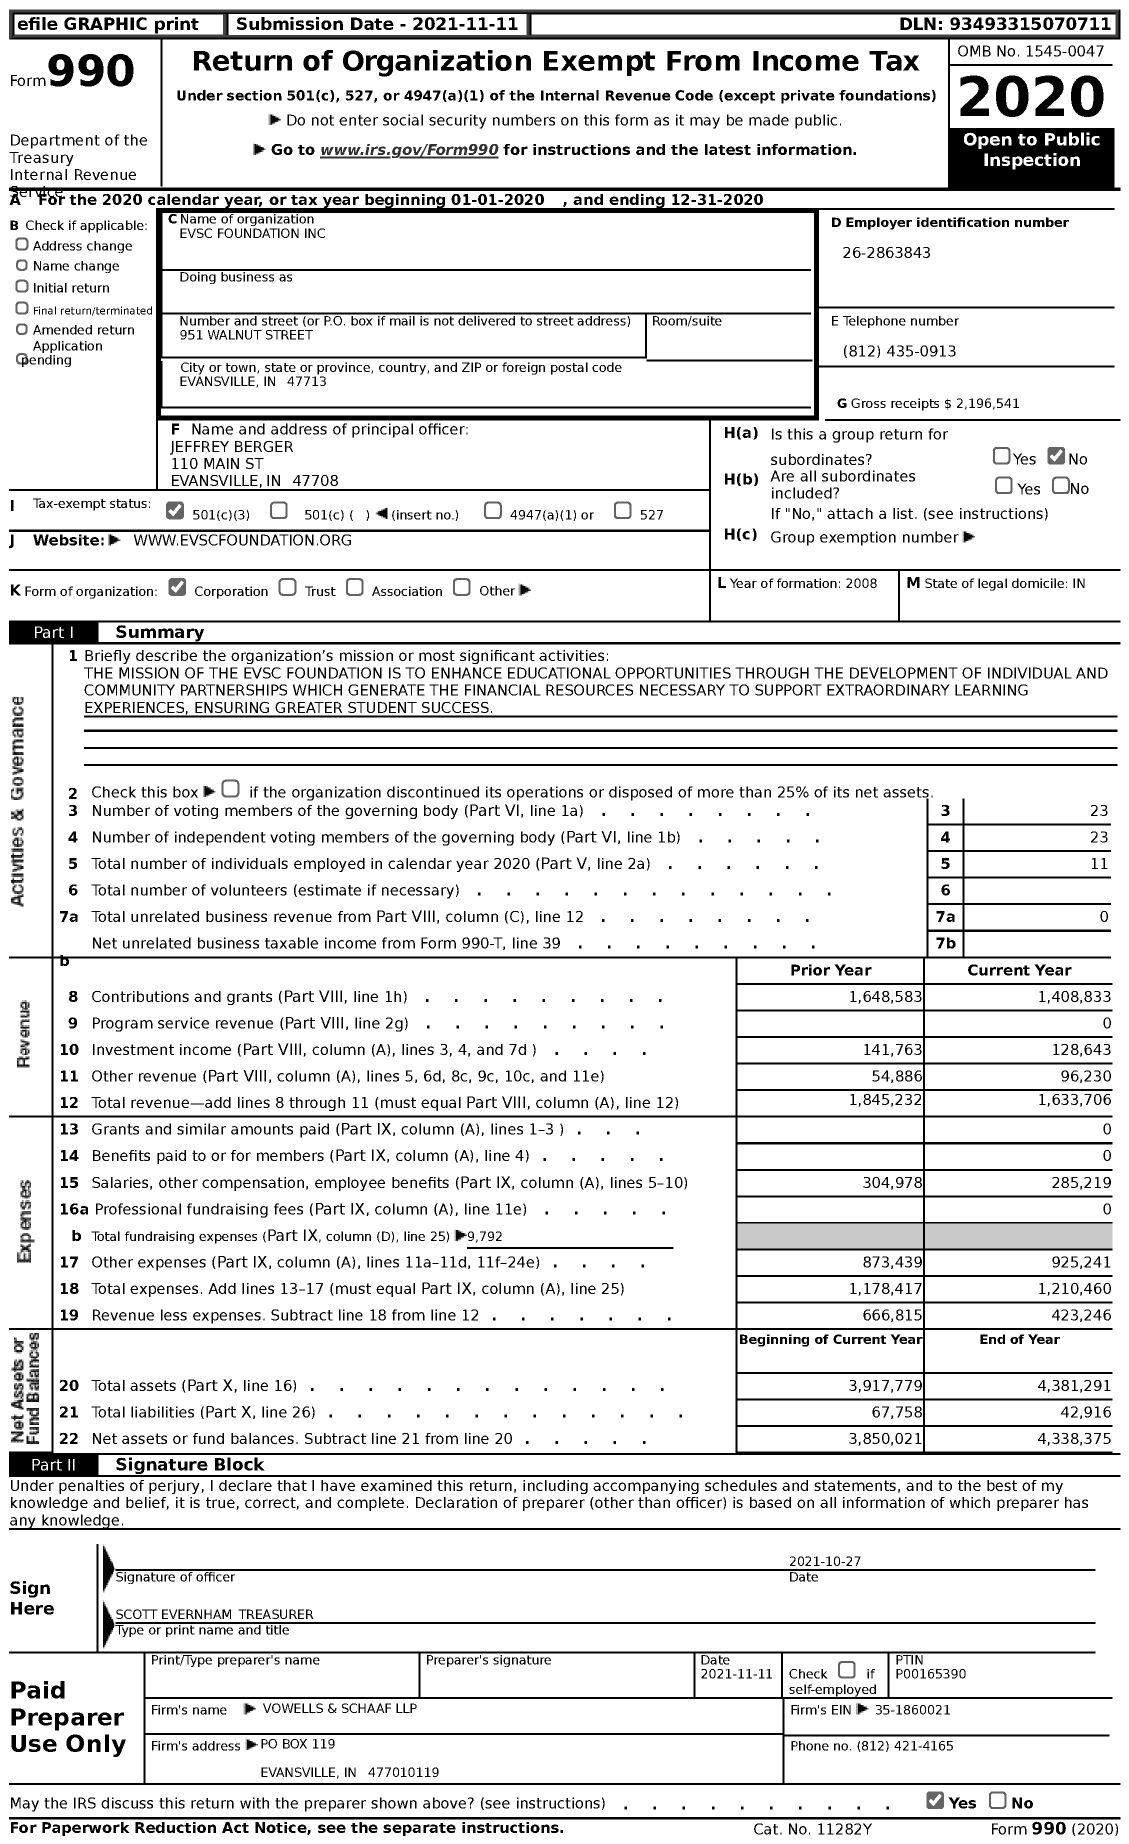 Image of first page of 2020 Form 990 for Evsc Foundation